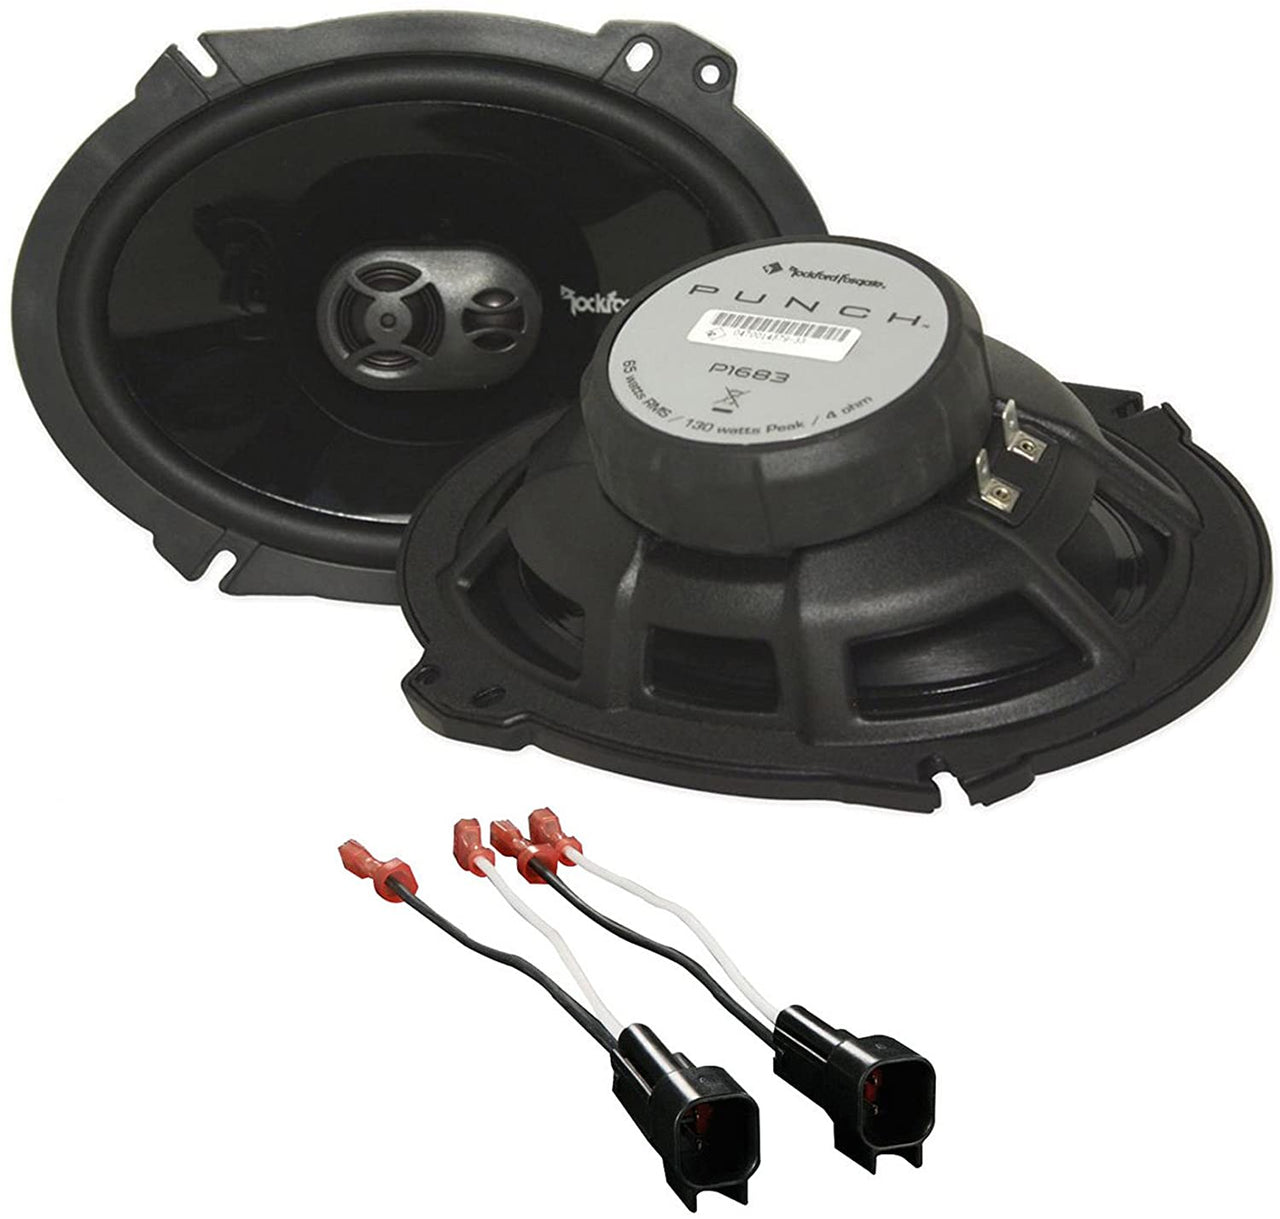 Rockford Fosgate P1683 6x8" Rear Speaker Replacement Kit & Absolute USA AS5600 Speaker Harness for 1999-04 Ford F-250/350/450/550